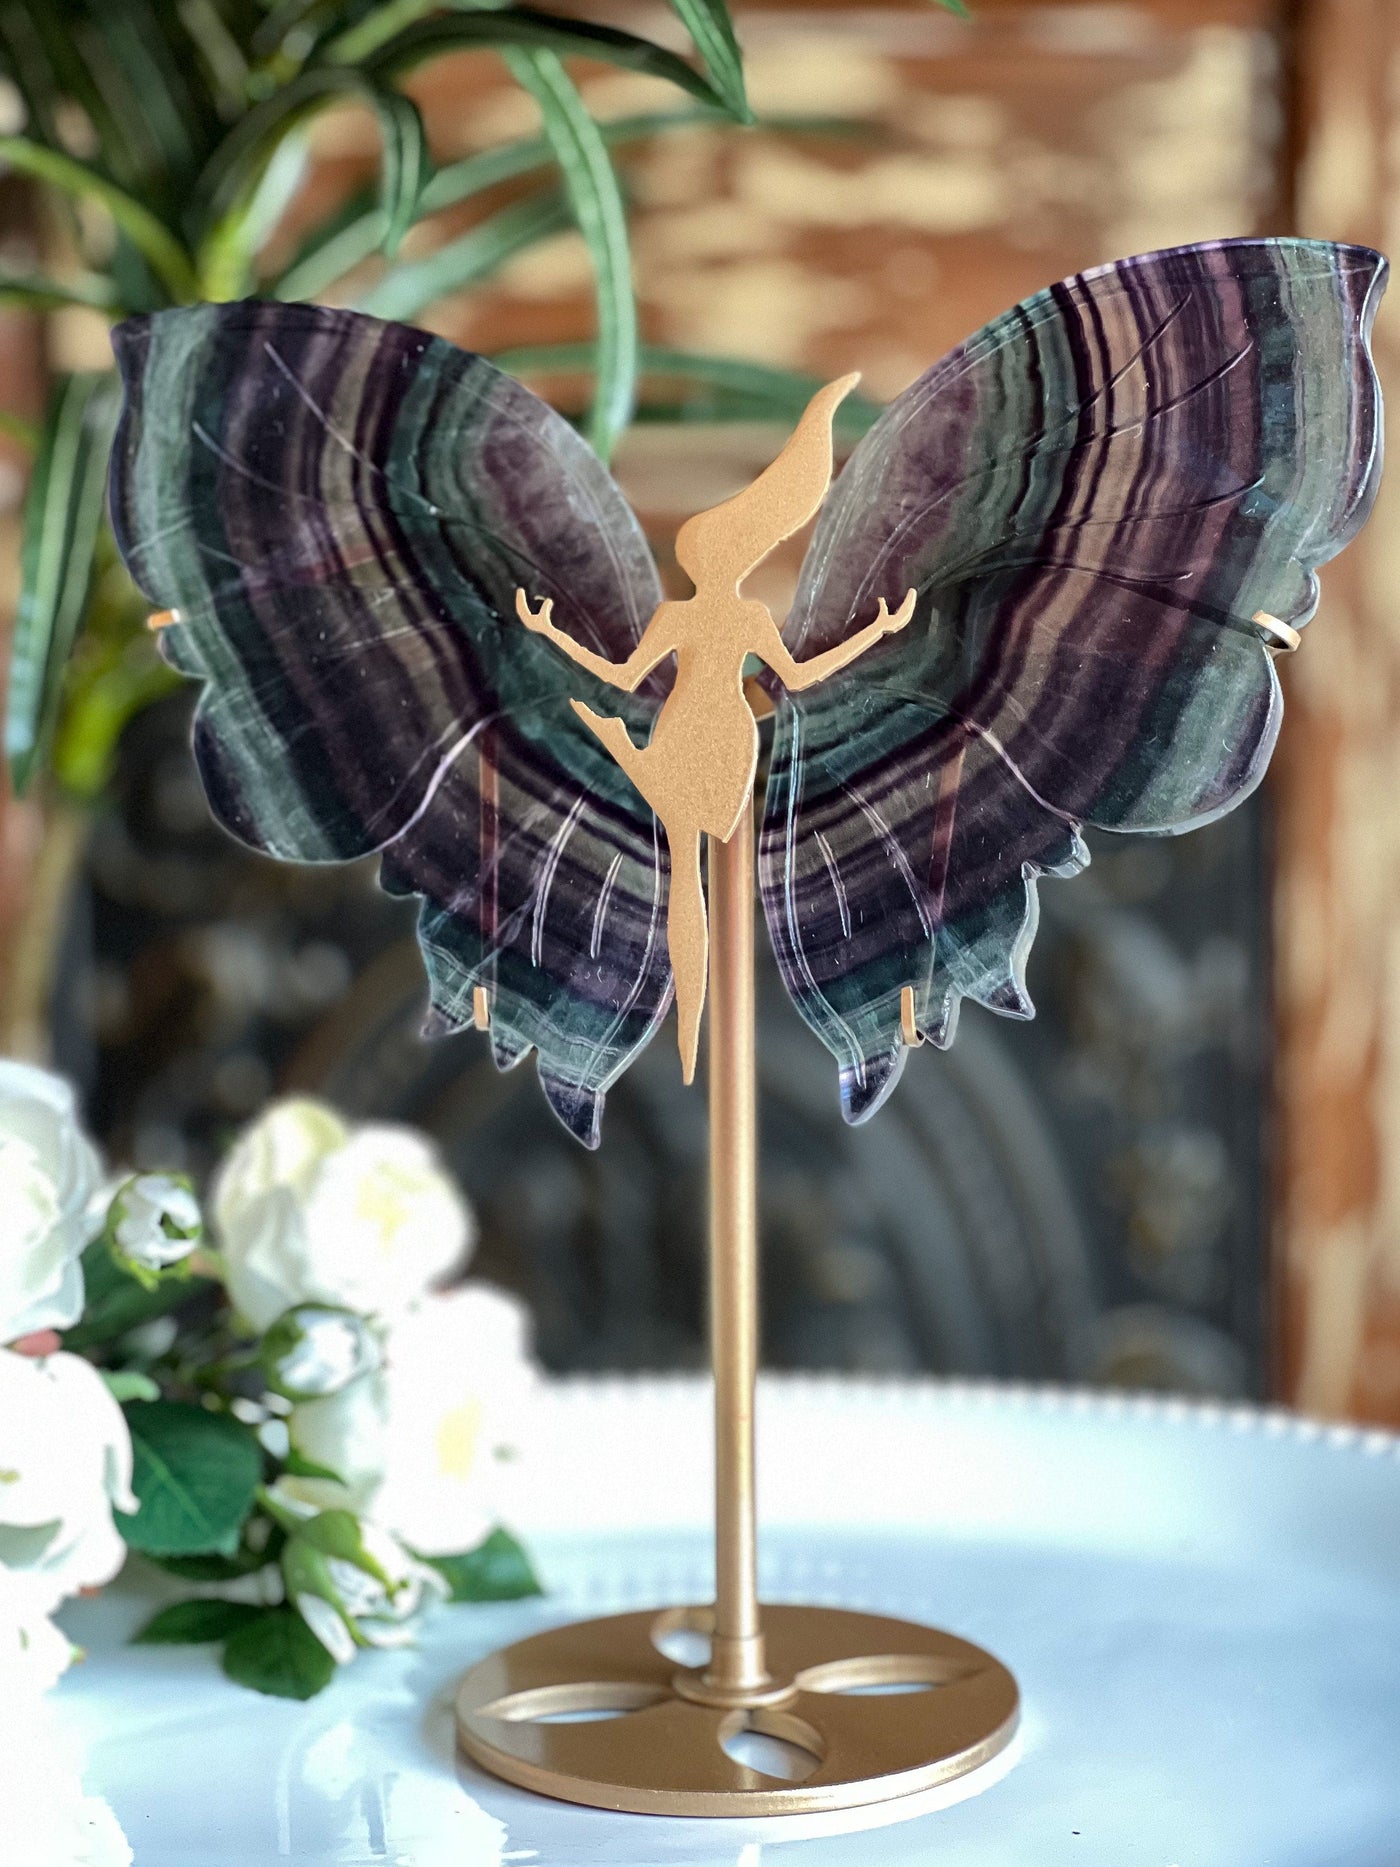 FAIRY WINGS OF RAINBOW FLUORITE ON GOLD STAND Revive In Style Vintage Furniture Painted Refinished Redesign Beautiful One of a Kind Artistic Antique Unique Home Decor Interior Design French Country Shabby Chic Cottage Farmhouse Grandmillenial Coastal Chalk Paint Metallic Glam Eclectic Quality Dovetailed Rustic Furniture Painter Pinterest Bedroom Living Room Entryway Kitchen Home Trends House Styles Decorating ideas